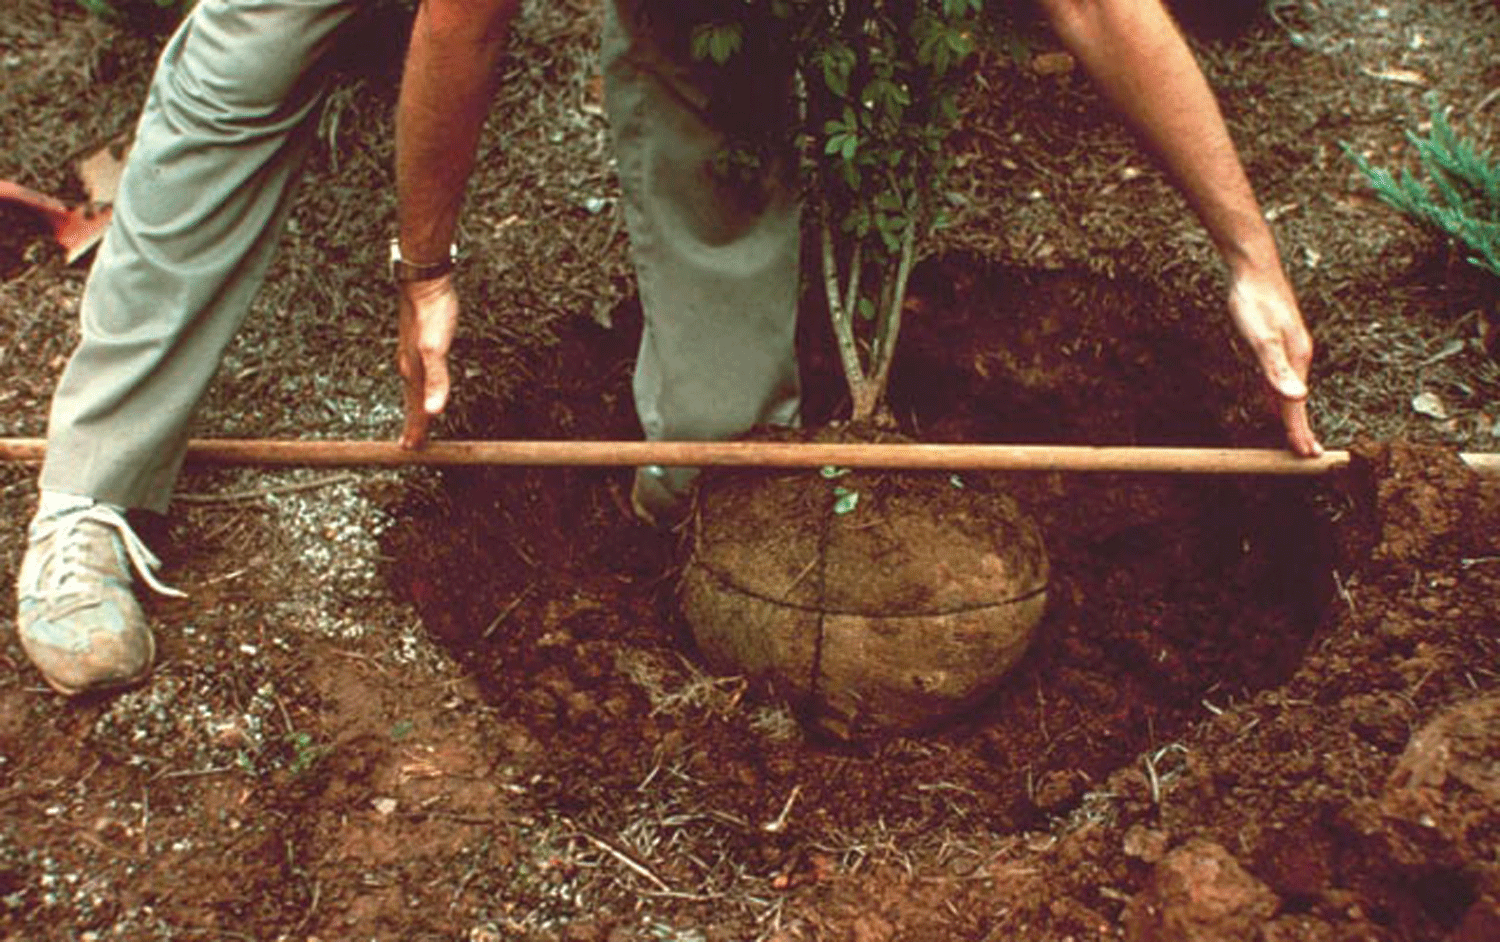 Tree being planted, with a stick being used to measure the size of the hole and the root ball being level with the ground.